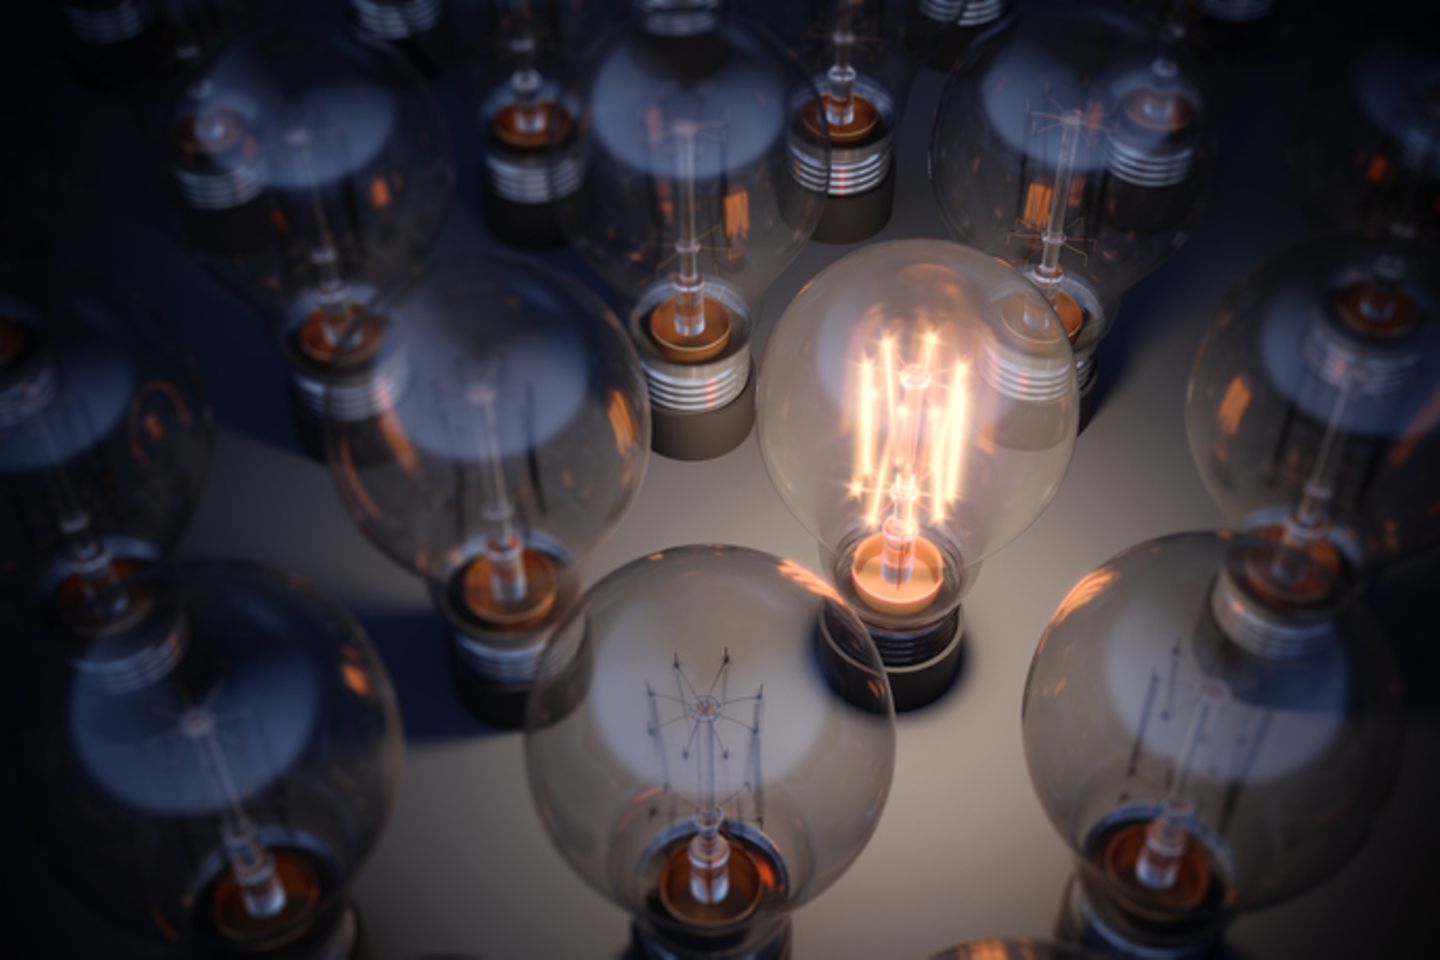 Picture shows several light bulbs, one of them is lit